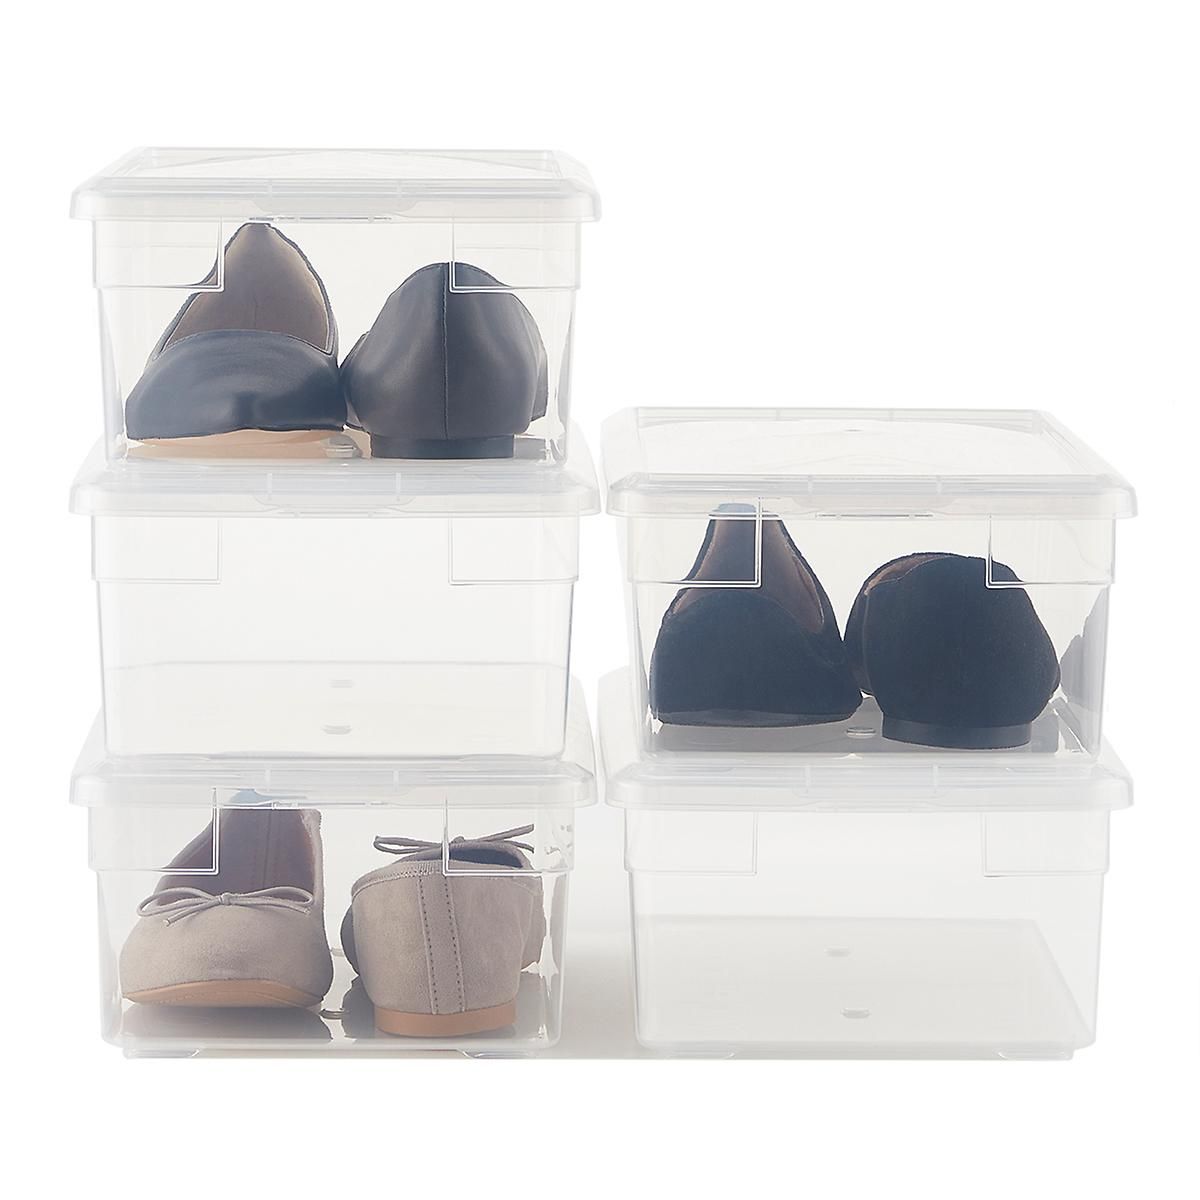 Our Shoe Box | The Container Store